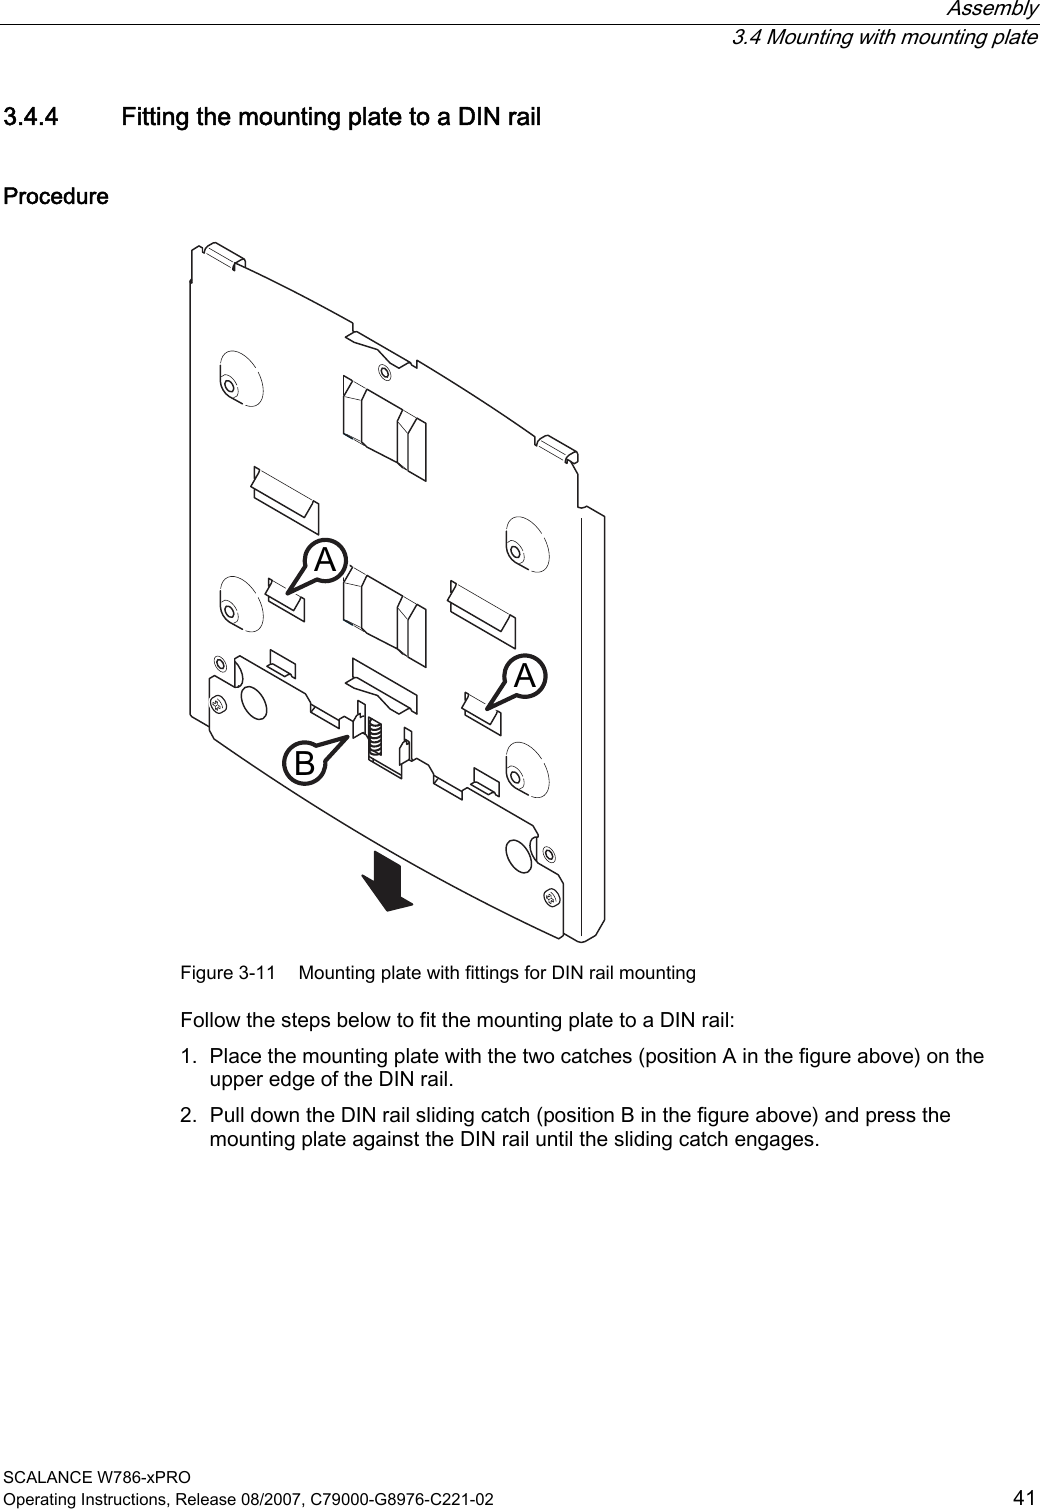  Assembly  3.4 Mounting with mounting plate SCALANCE W786-xPRO Operating Instructions, Release 08/2007, C79000-G8976-C221-02  41 3.4.4 Fitting the mounting plate to a DIN rail Procedure AAB Figure 3-11  Mounting plate with fittings for DIN rail mounting Follow the steps below to fit the mounting plate to a DIN rail: 1. Place the mounting plate with the two catches (position A in the figure above) on the upper edge of the DIN rail. 2. Pull down the DIN rail sliding catch (position B in the figure above) and press the mounting plate against the DIN rail until the sliding catch engages.    